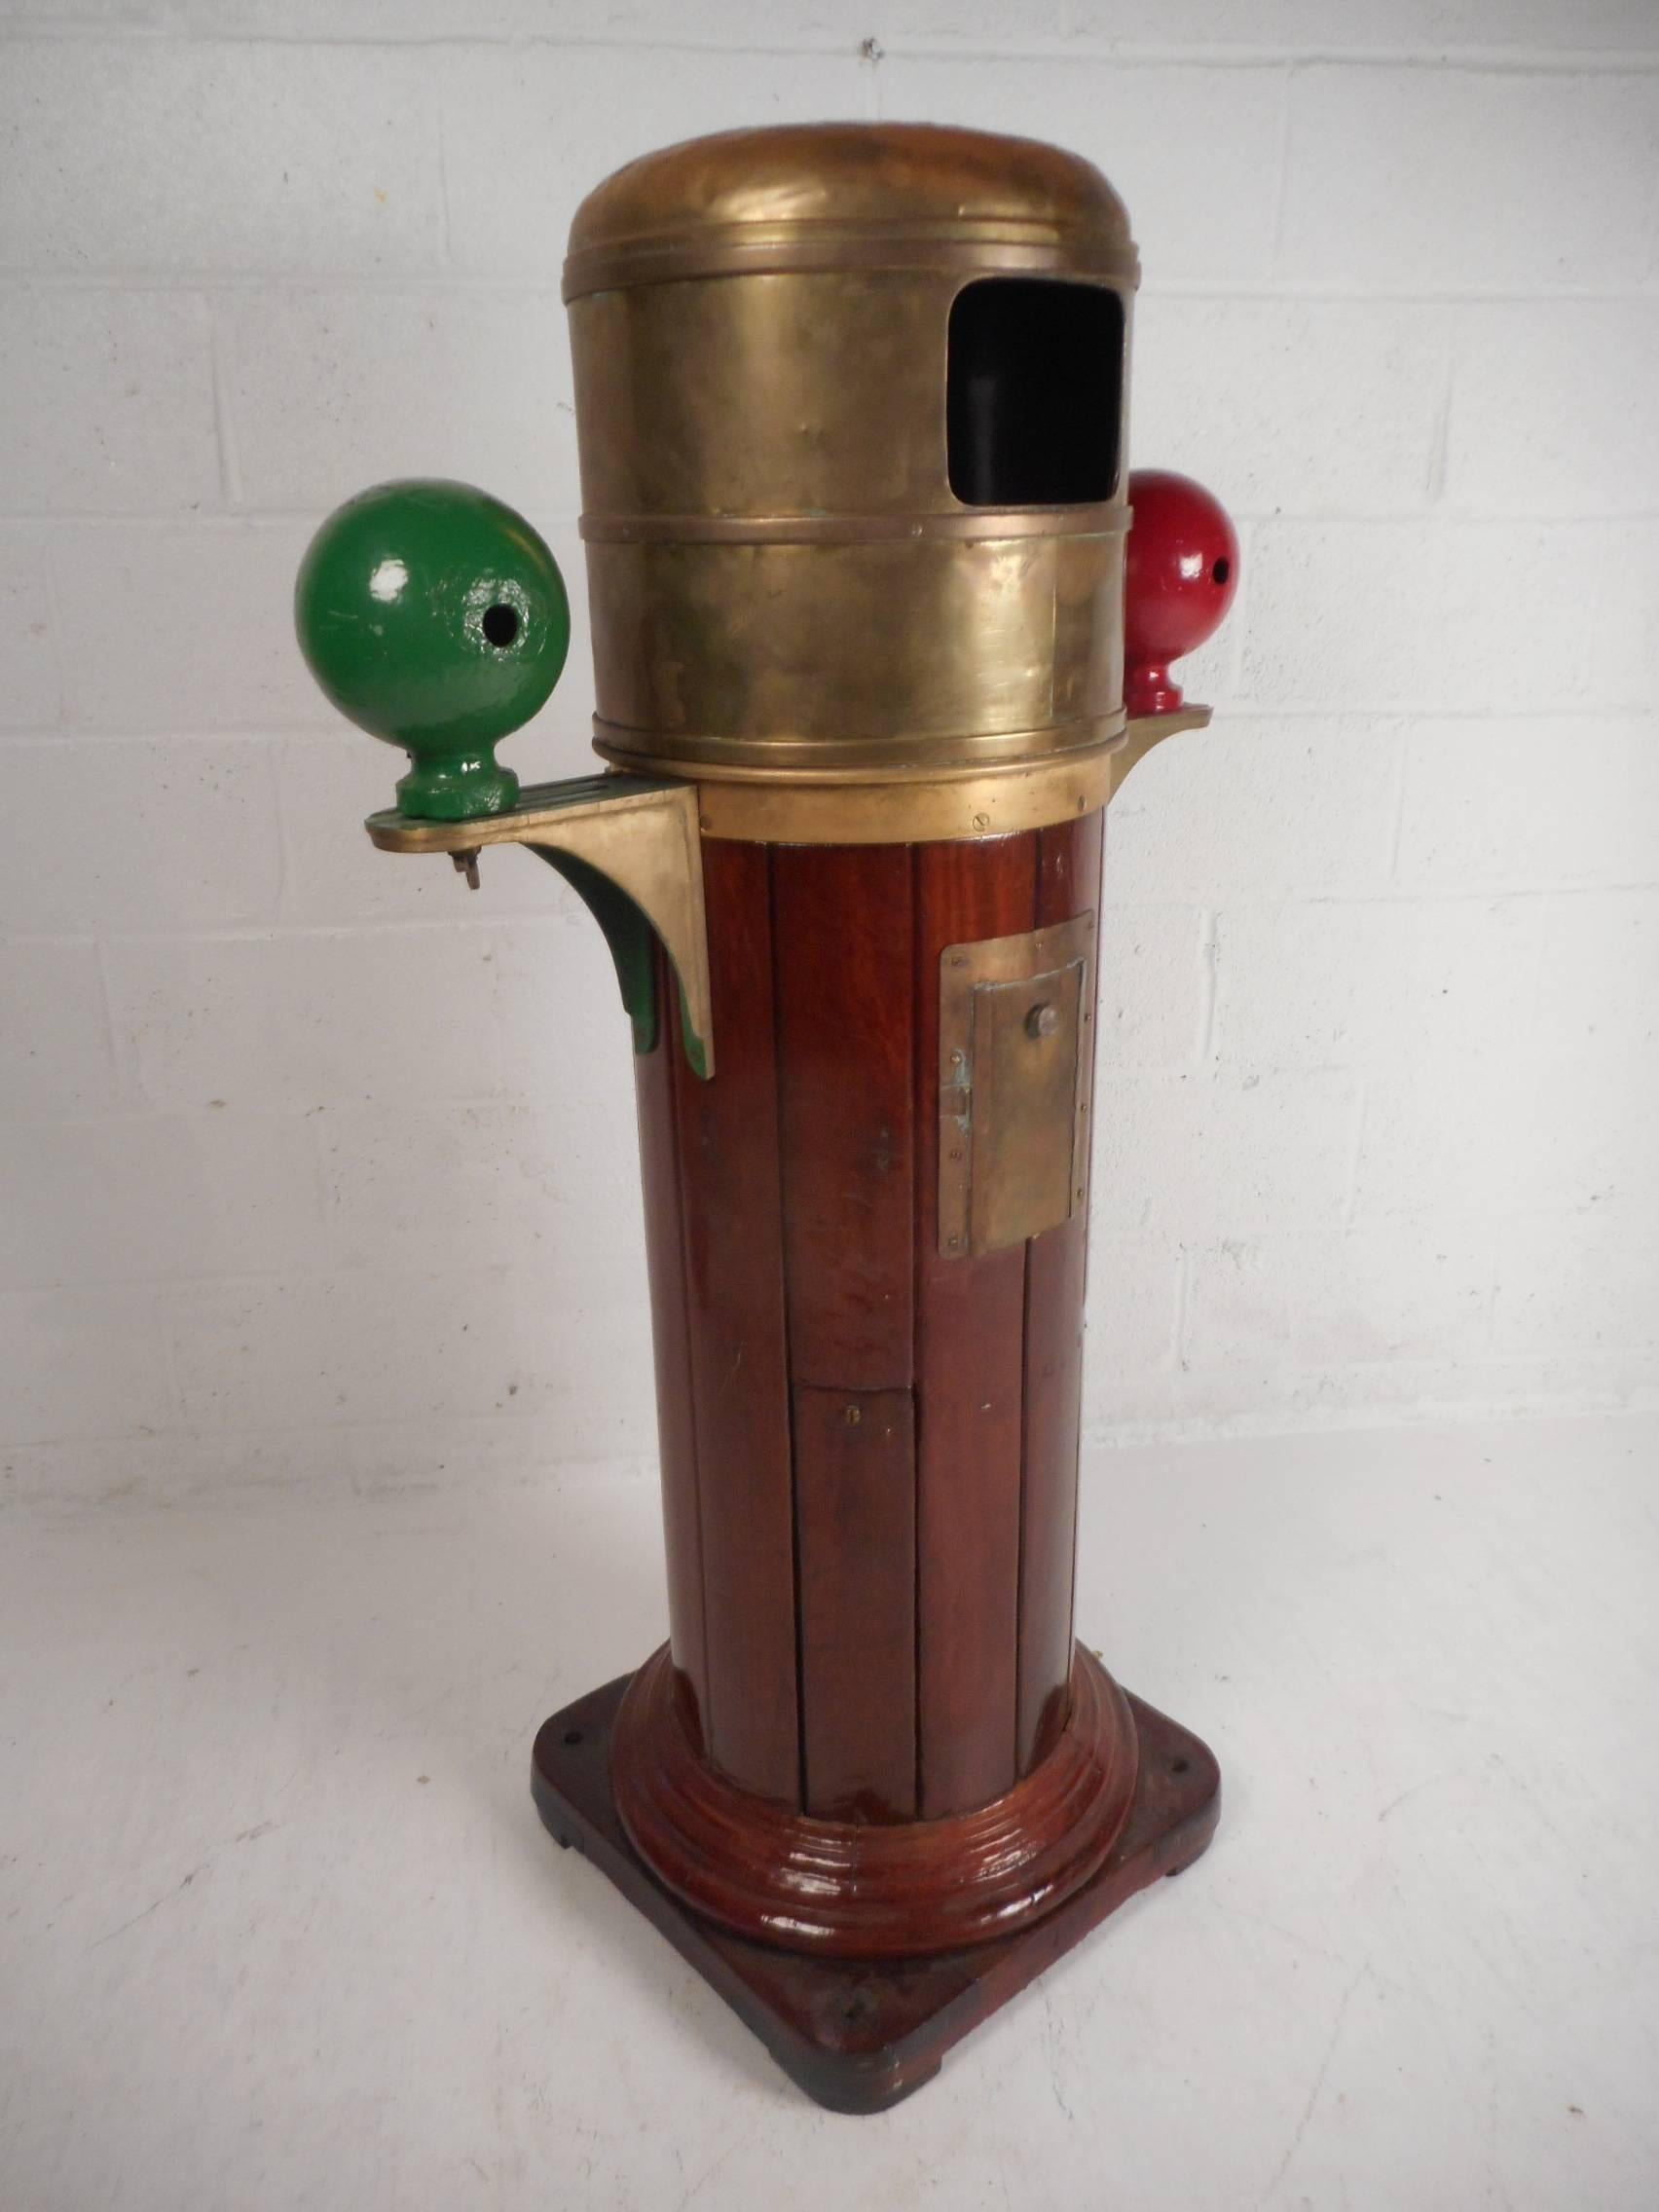 This wonderful vintage binnacle has a Kelvin and Hughes limited compass that sits comfortably underneath the brass top. Cylindrical teak case with two side mounted compensation spheres and a lamp housing on the back. This once functioned on a real